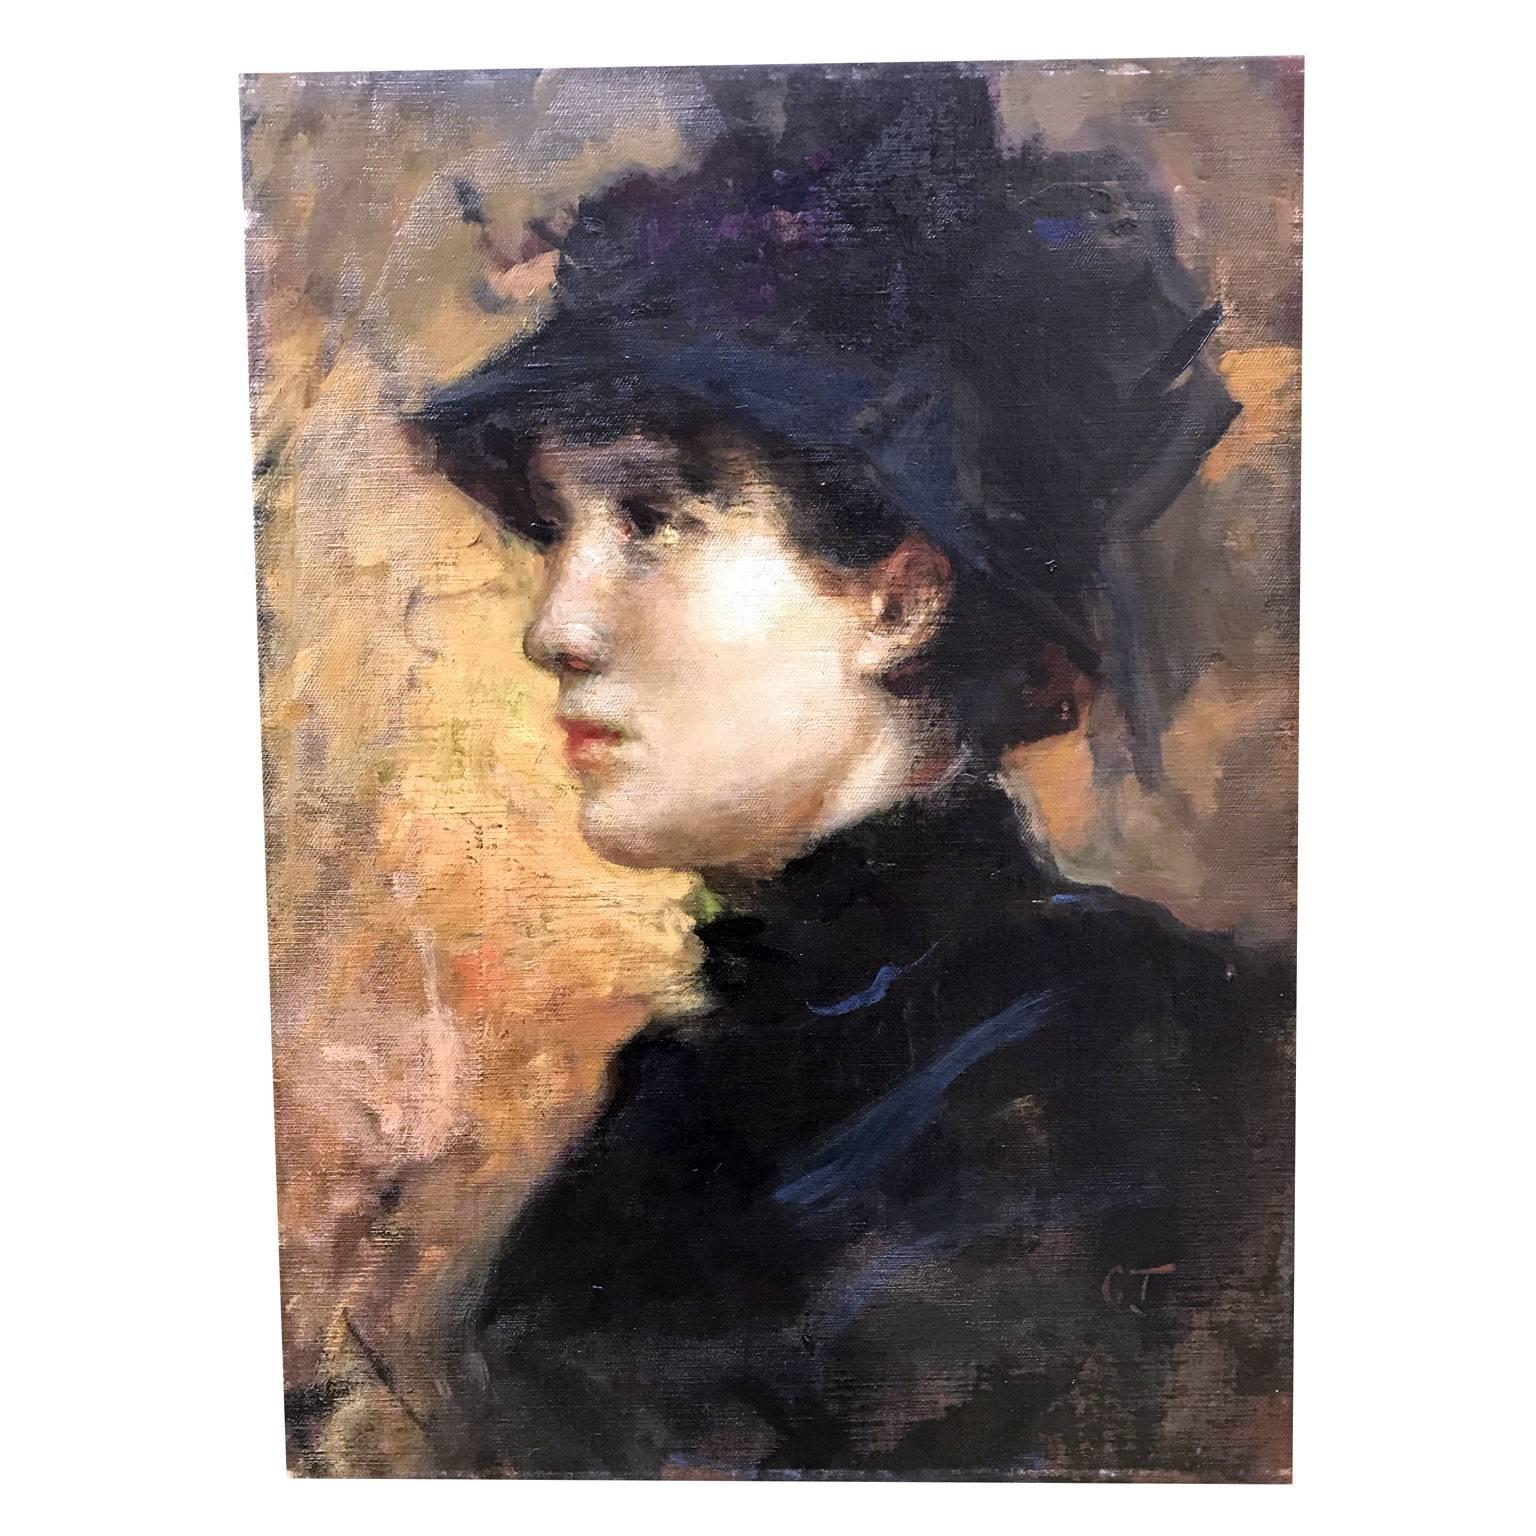 An oil on canvas painting by the Italian painter Cesare Tallone, Savona, 1853-Milano 1919, depicting a profile portrait of a lady with hat, 1880 circa, signed lower right with C.T. the artist monogram.

This work is cataloged as nr. 28 in the